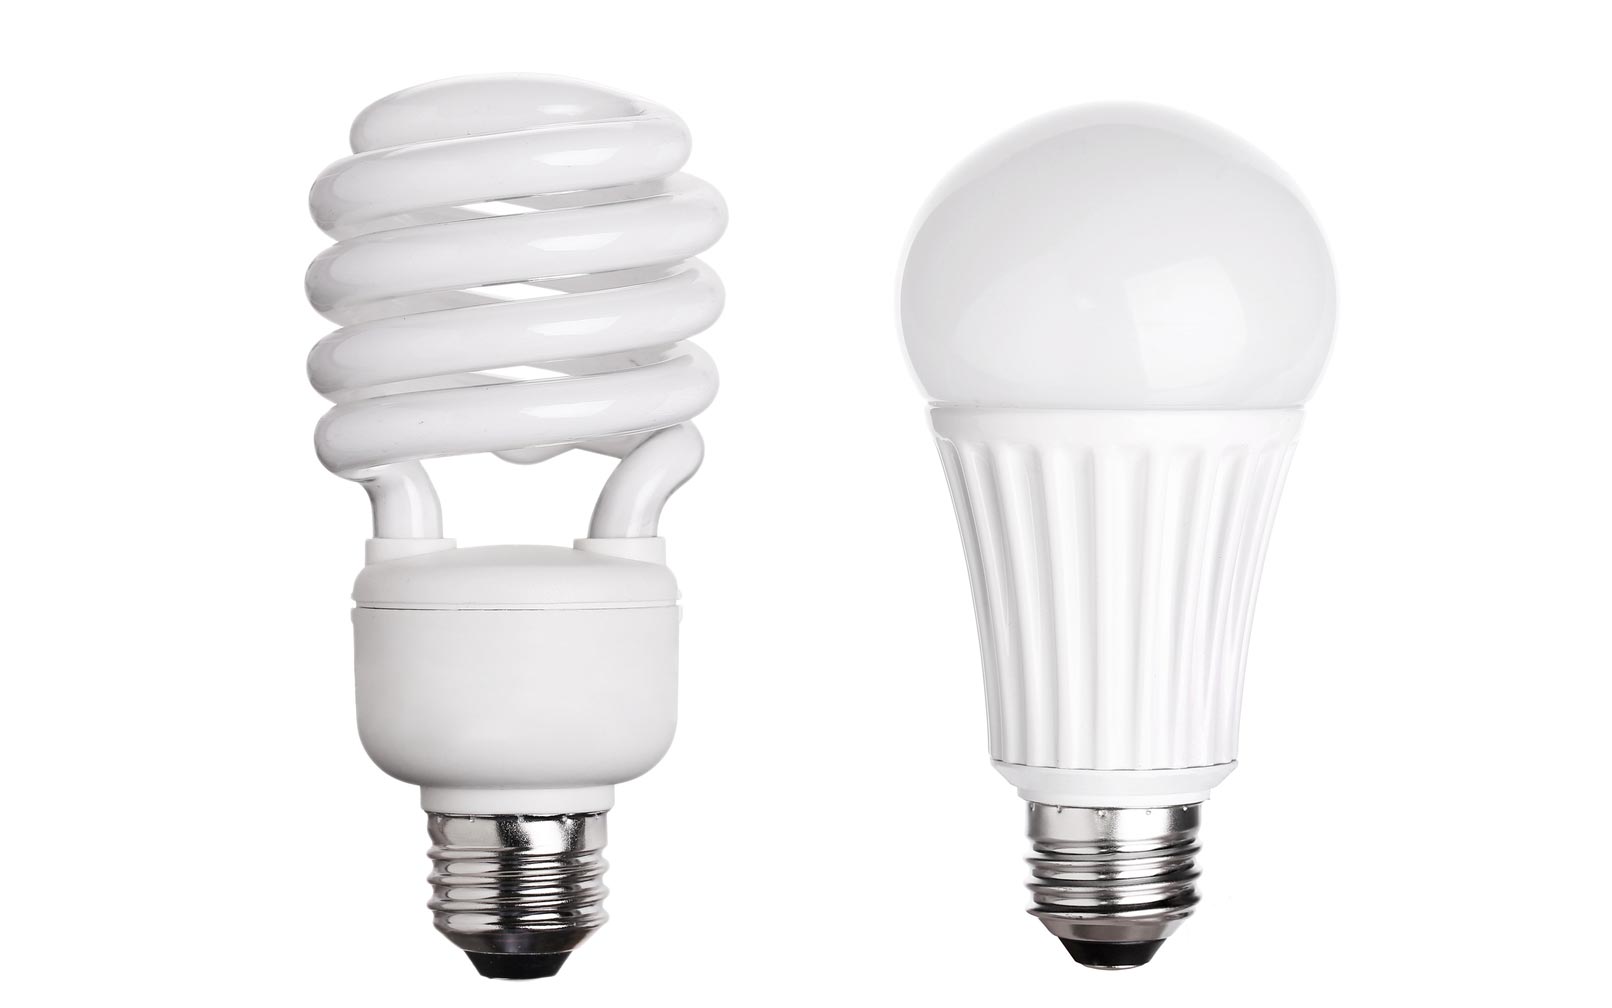 CFL VS LED Lighting: Why CFL Lights Are Believed To Cause Health Problems